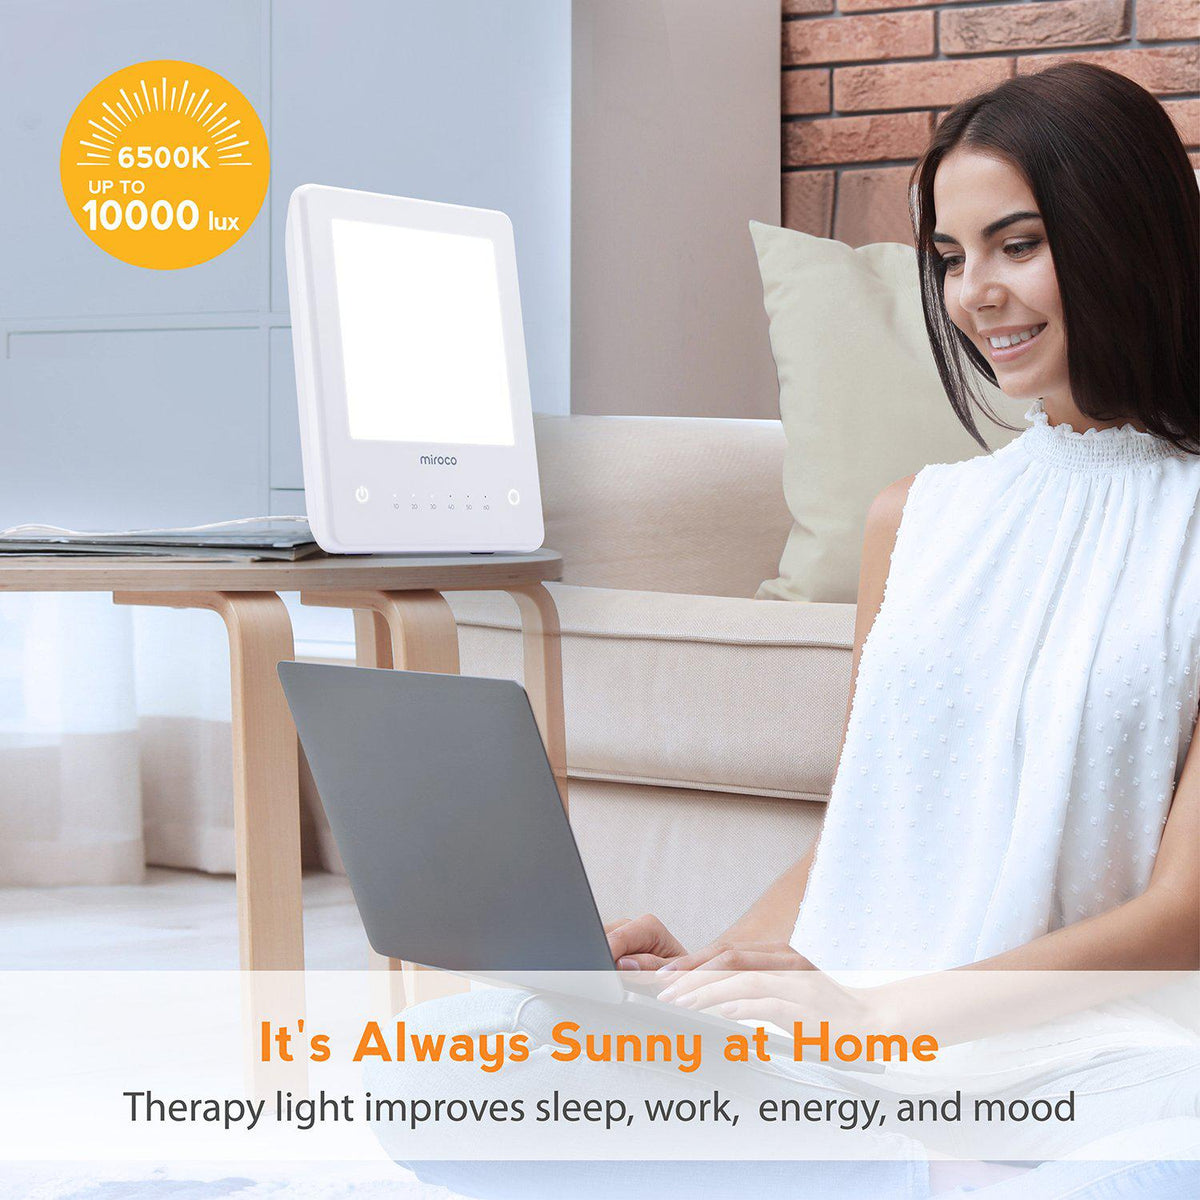 Light Therapy Lamp, Miroco UV Free 10000 Lux Therapy Lamp with Adjustable Time-TaoTronics